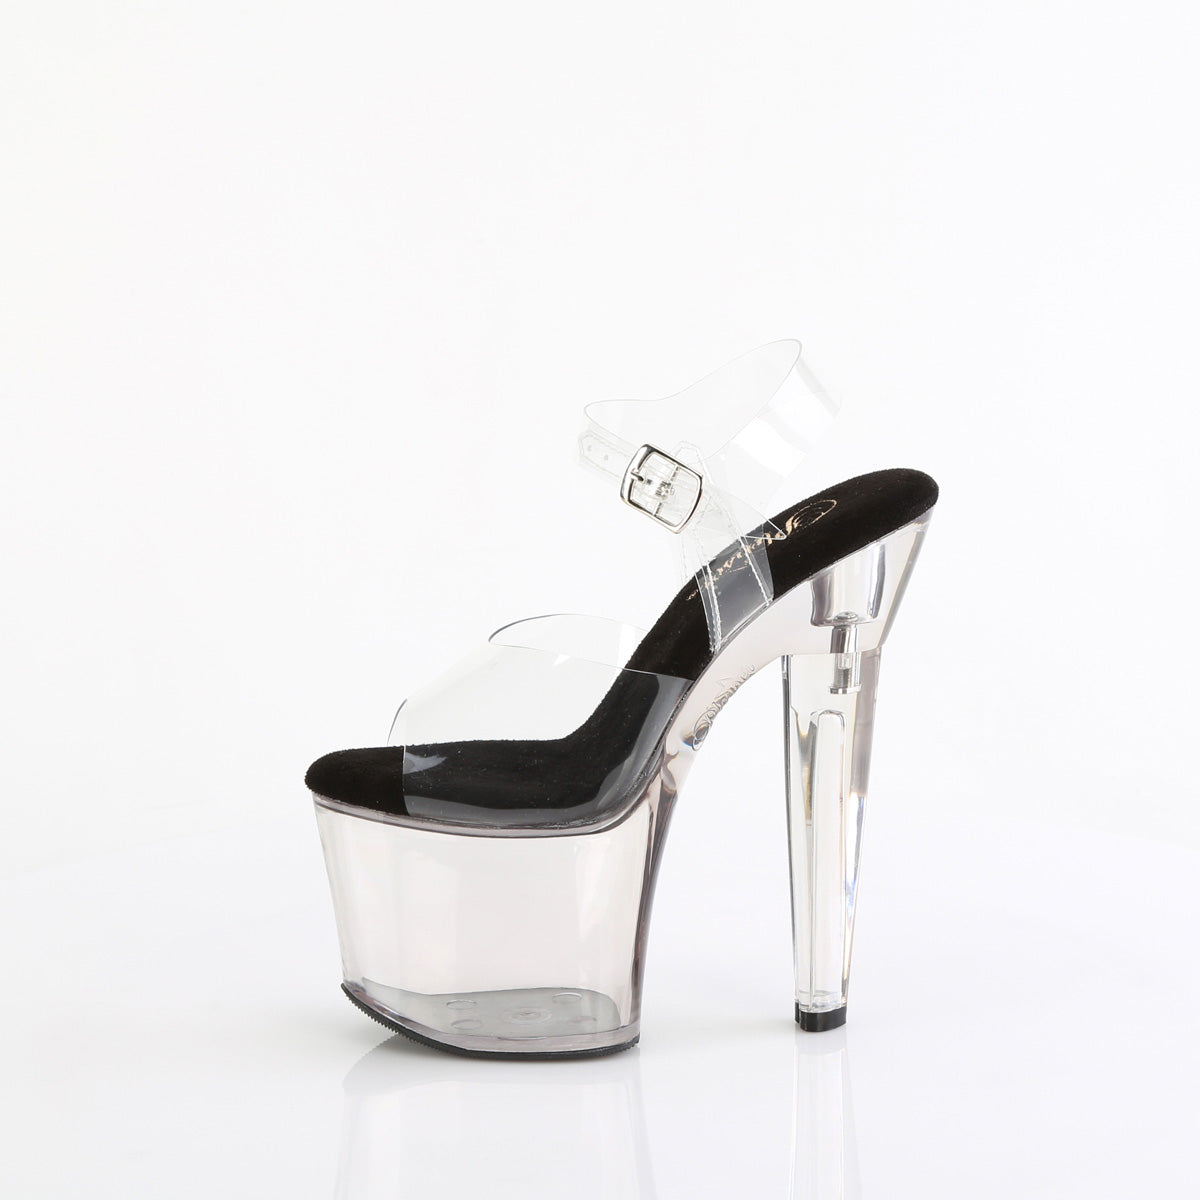 LOVESICK-708T Pleaser Sexy 7 Inch Tinted High Heels Perspex Pole Shoes